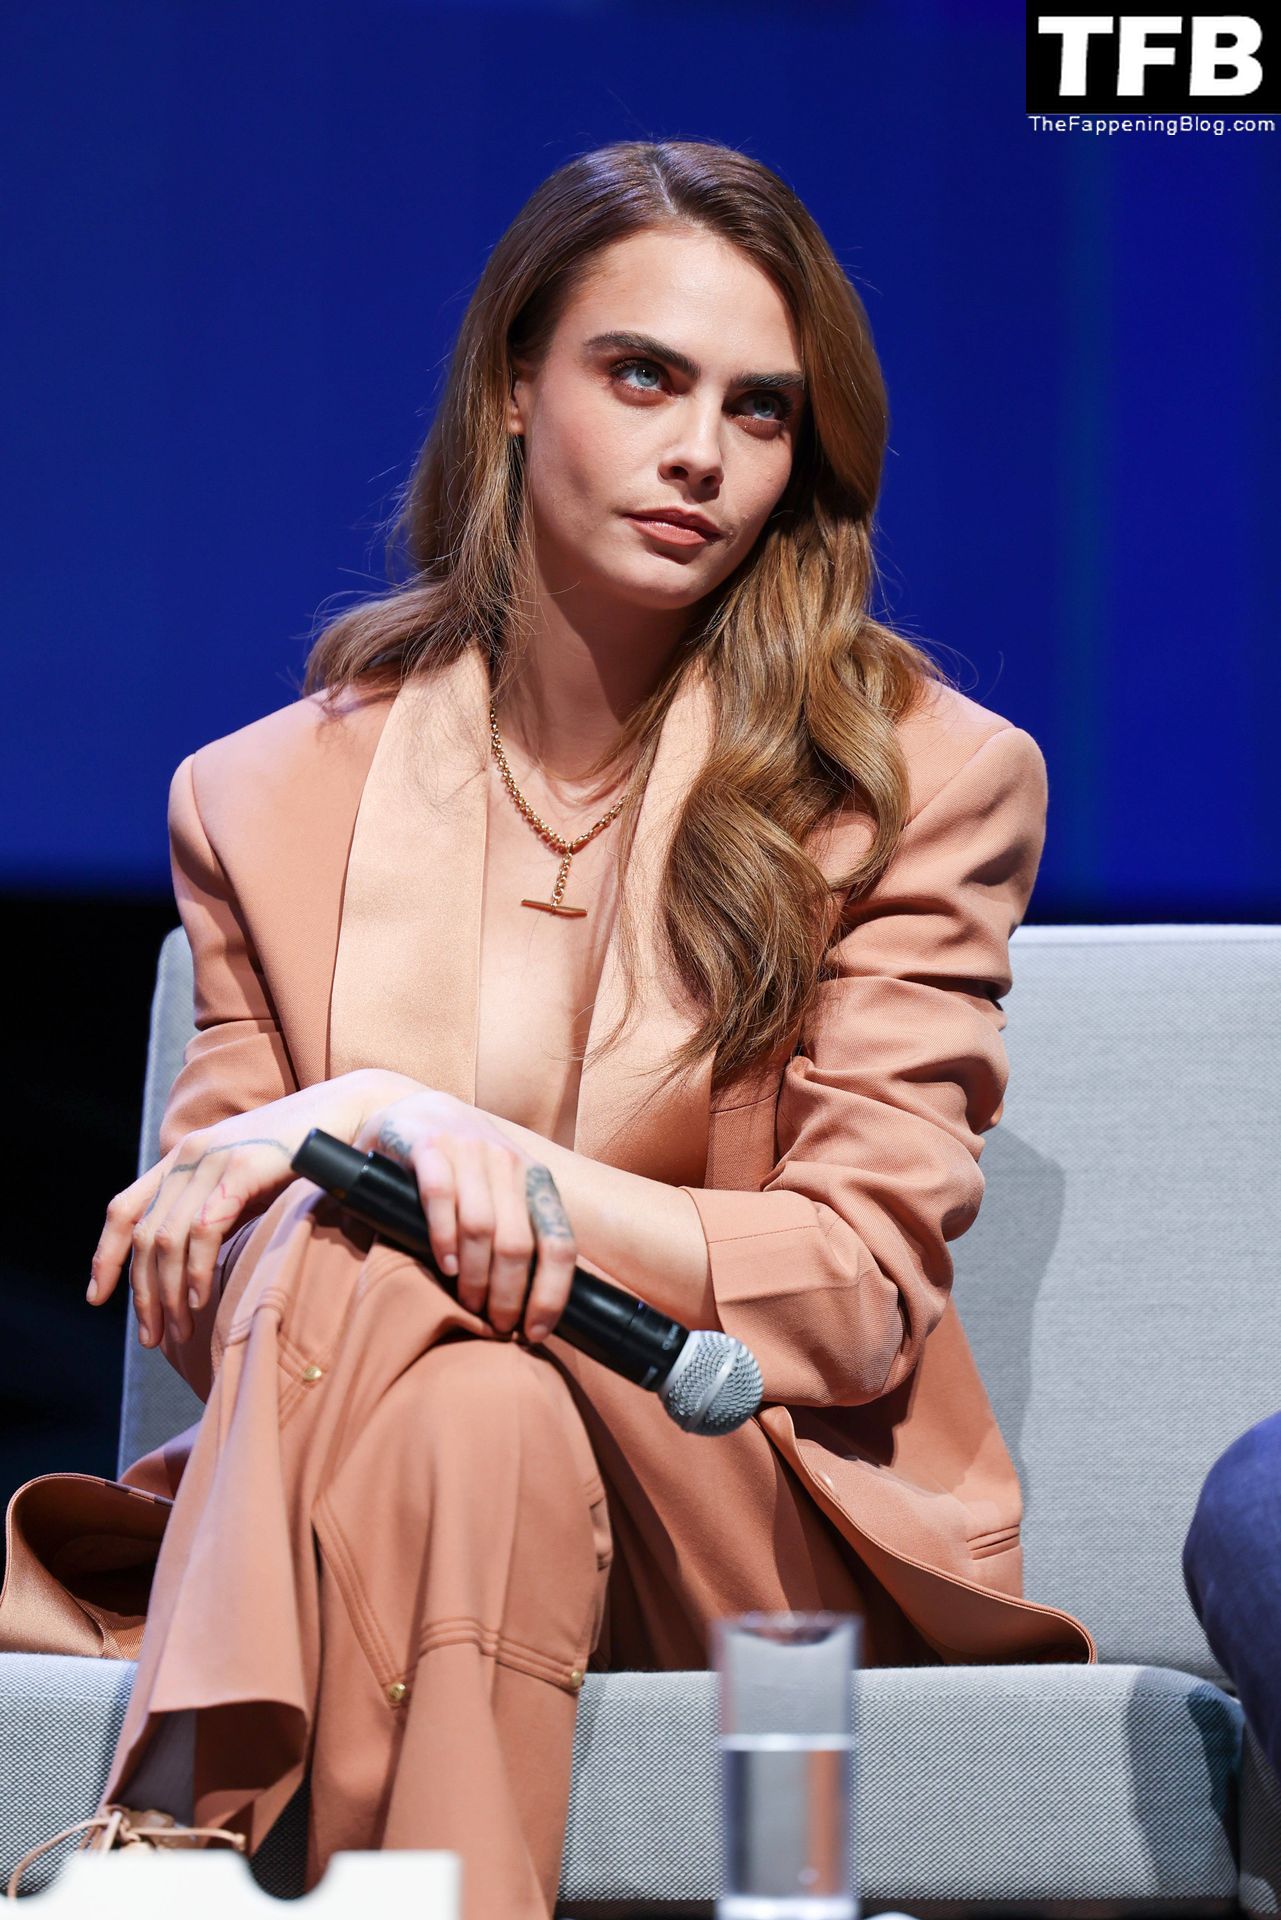 Cara-Delevingne-Sexy-The-Fappening-Blog-49-1.jpg